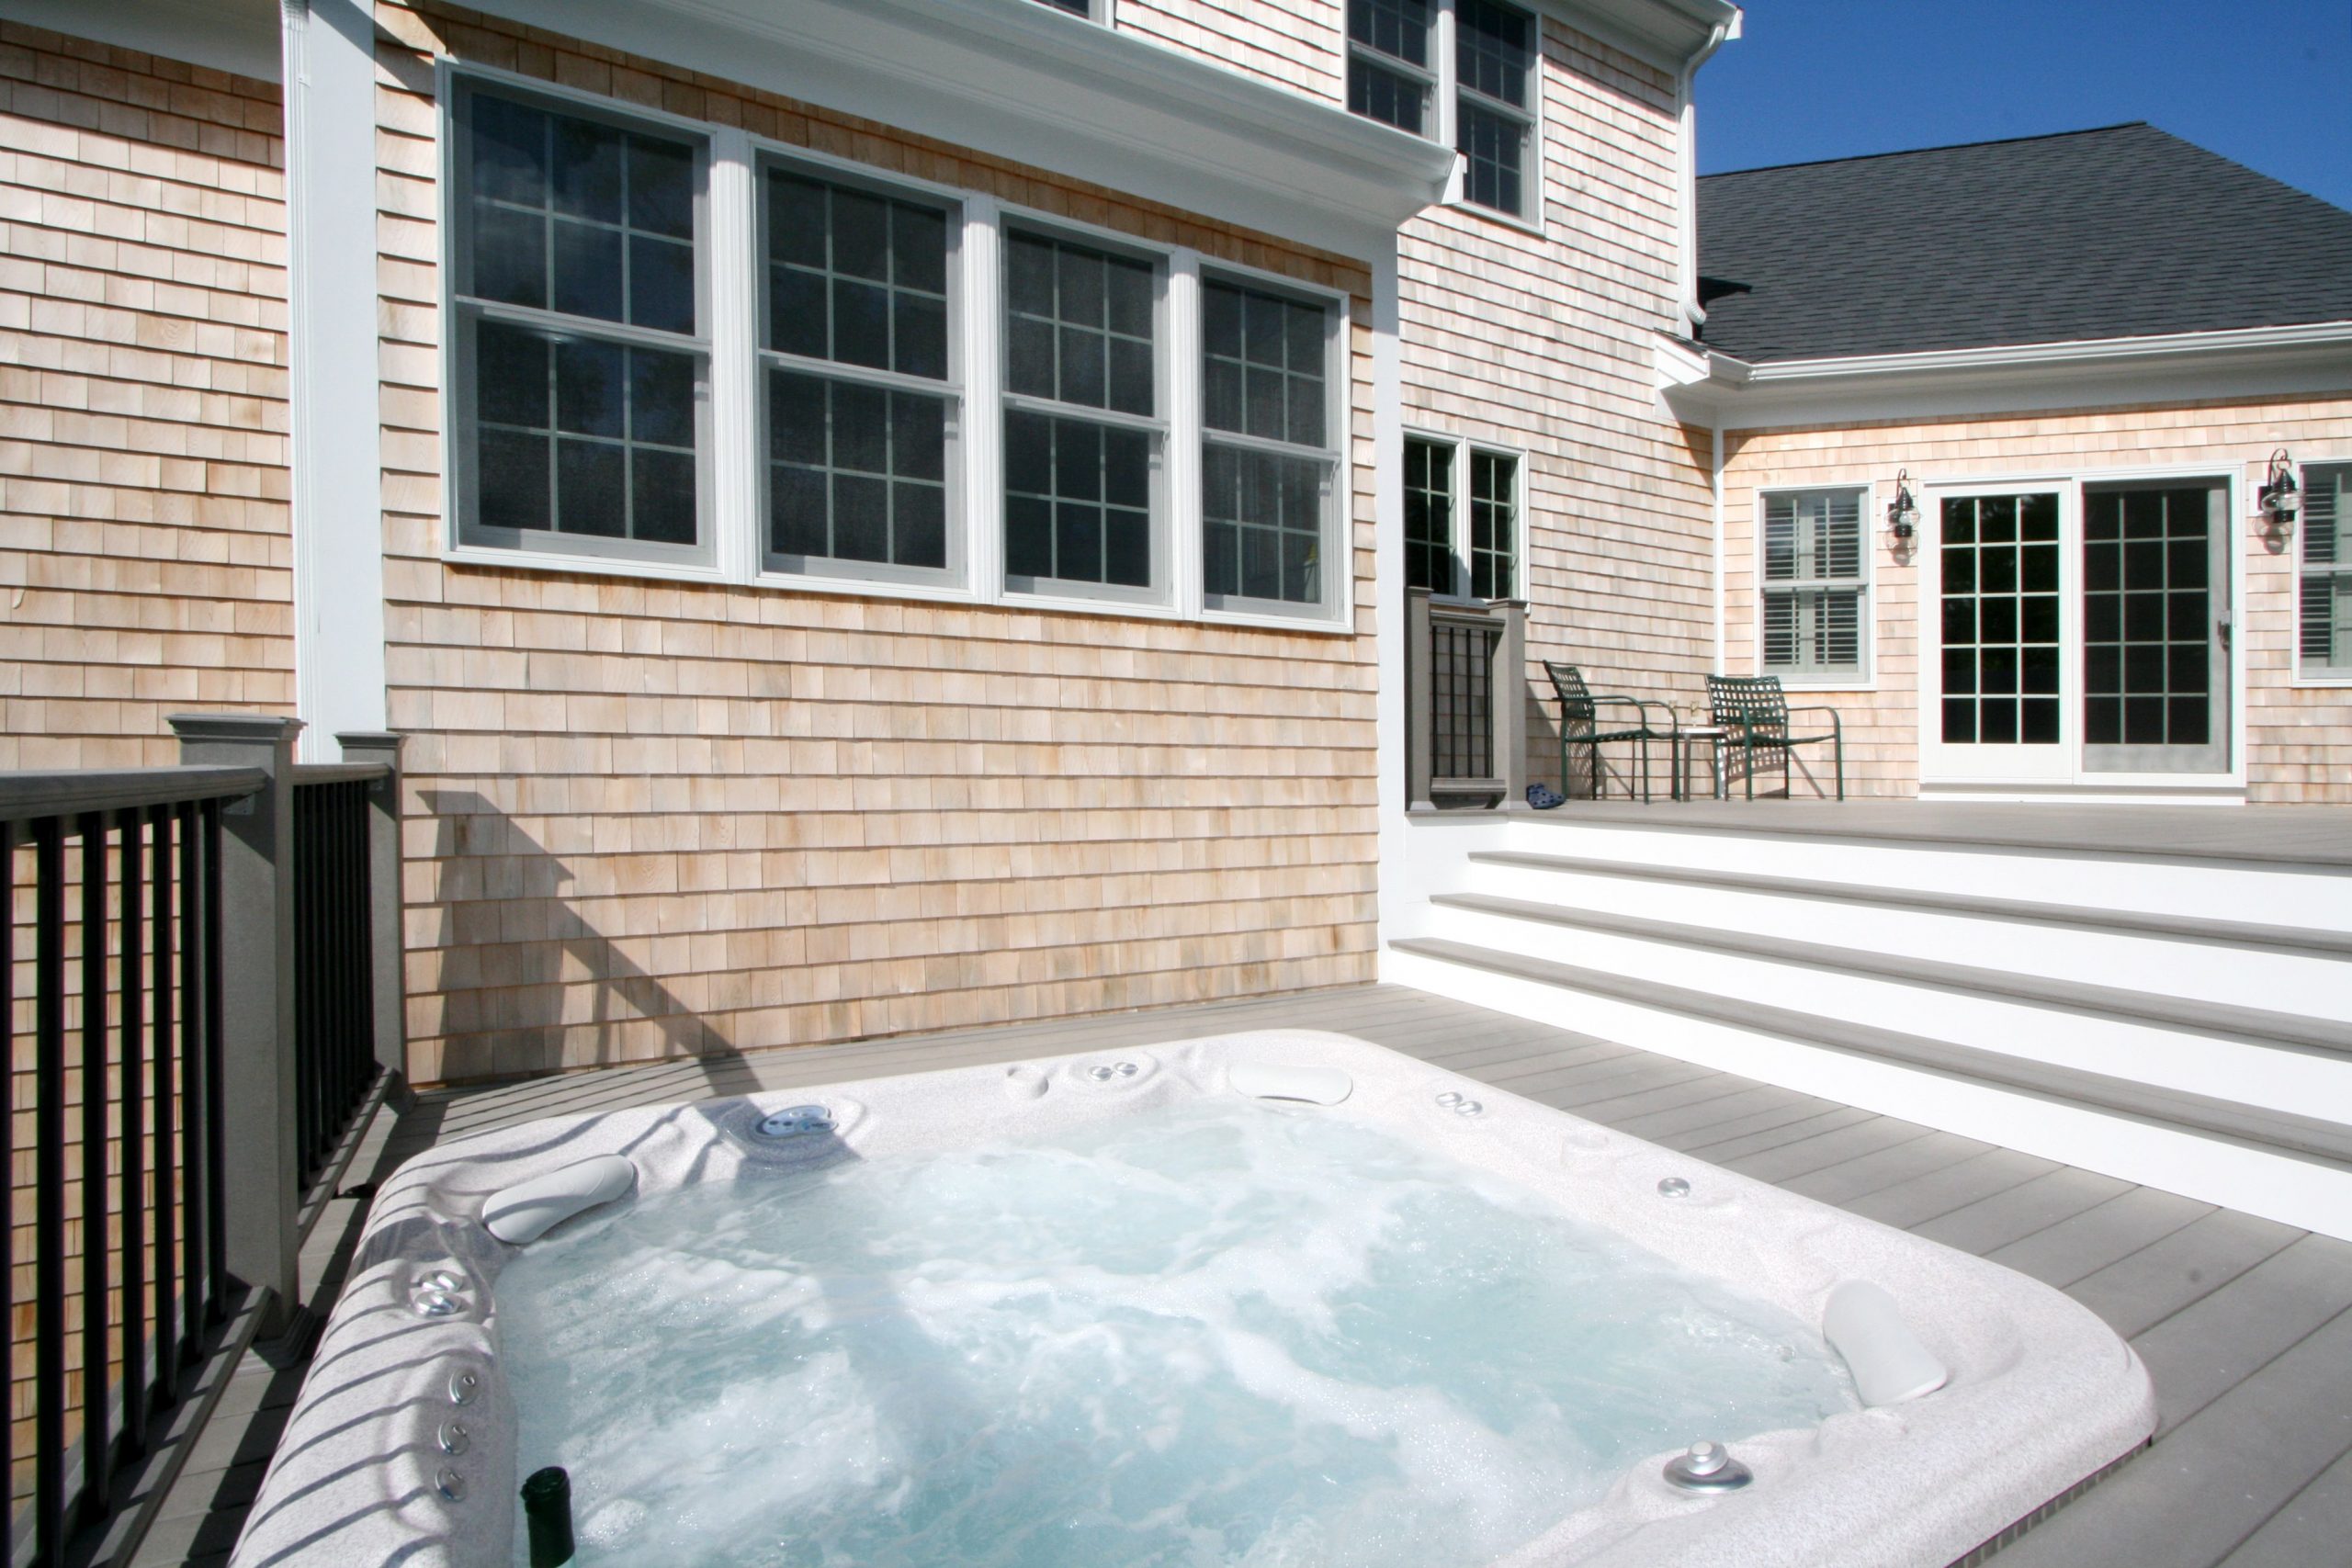 Custom deck with recessed hot tub, new home, Brewster, MA, by REEF ...